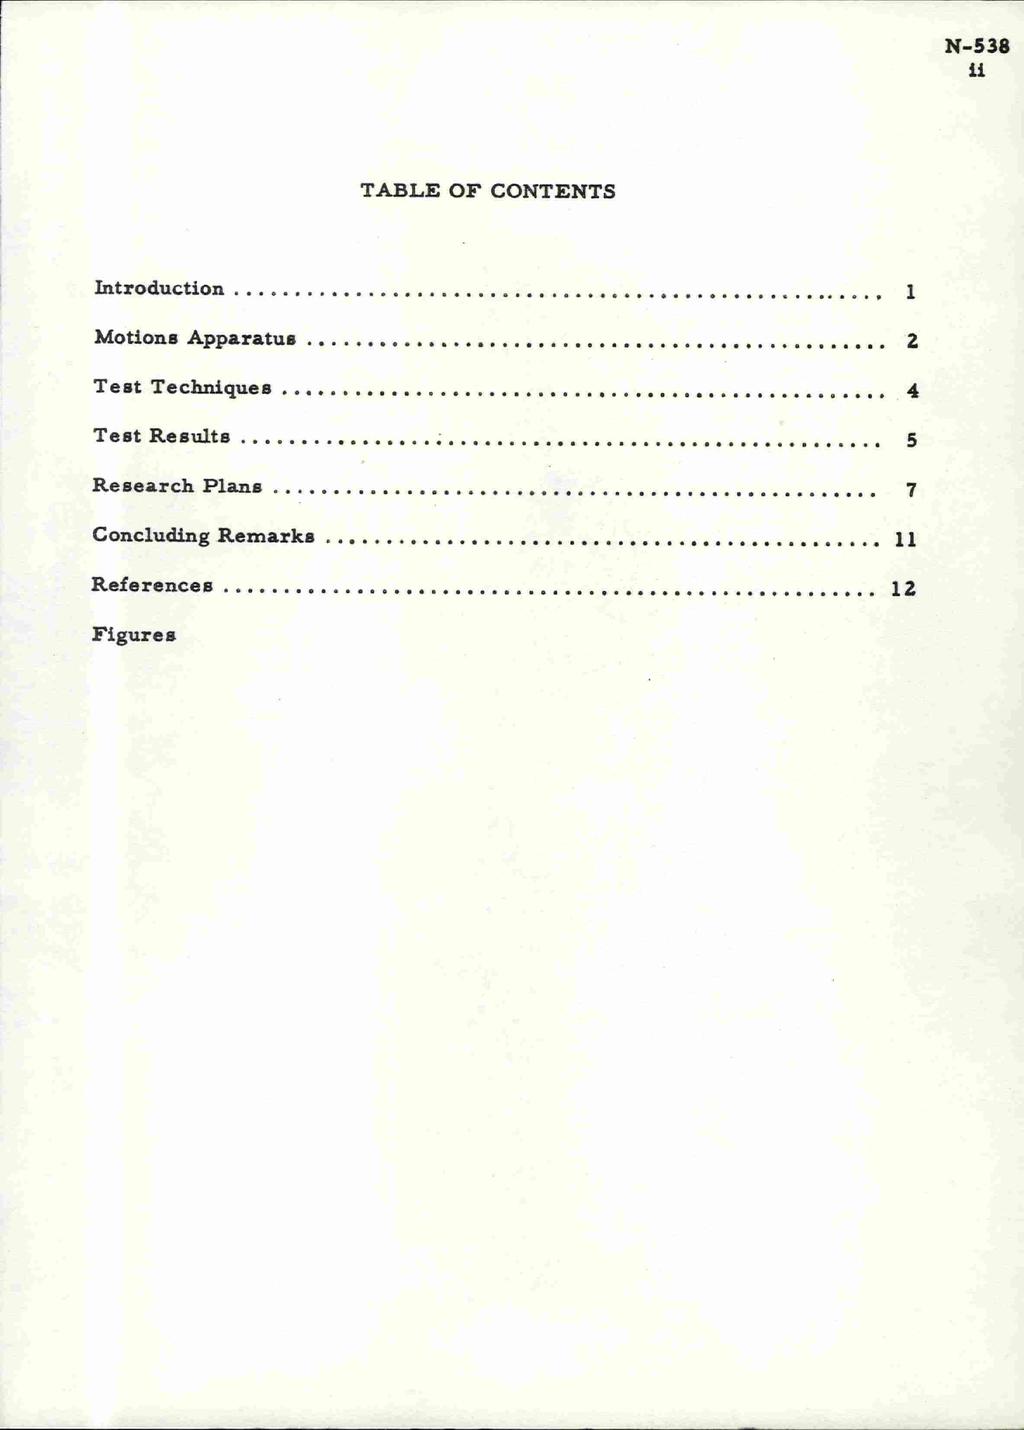 N-538 ii TABLE OF CONTENTS Introduction L.. 1 A * A, 0" * Motions Apparatus AD. ;in, )10 41,, Ipt 1J, IN) p p A Test Techniques IP 0' *.